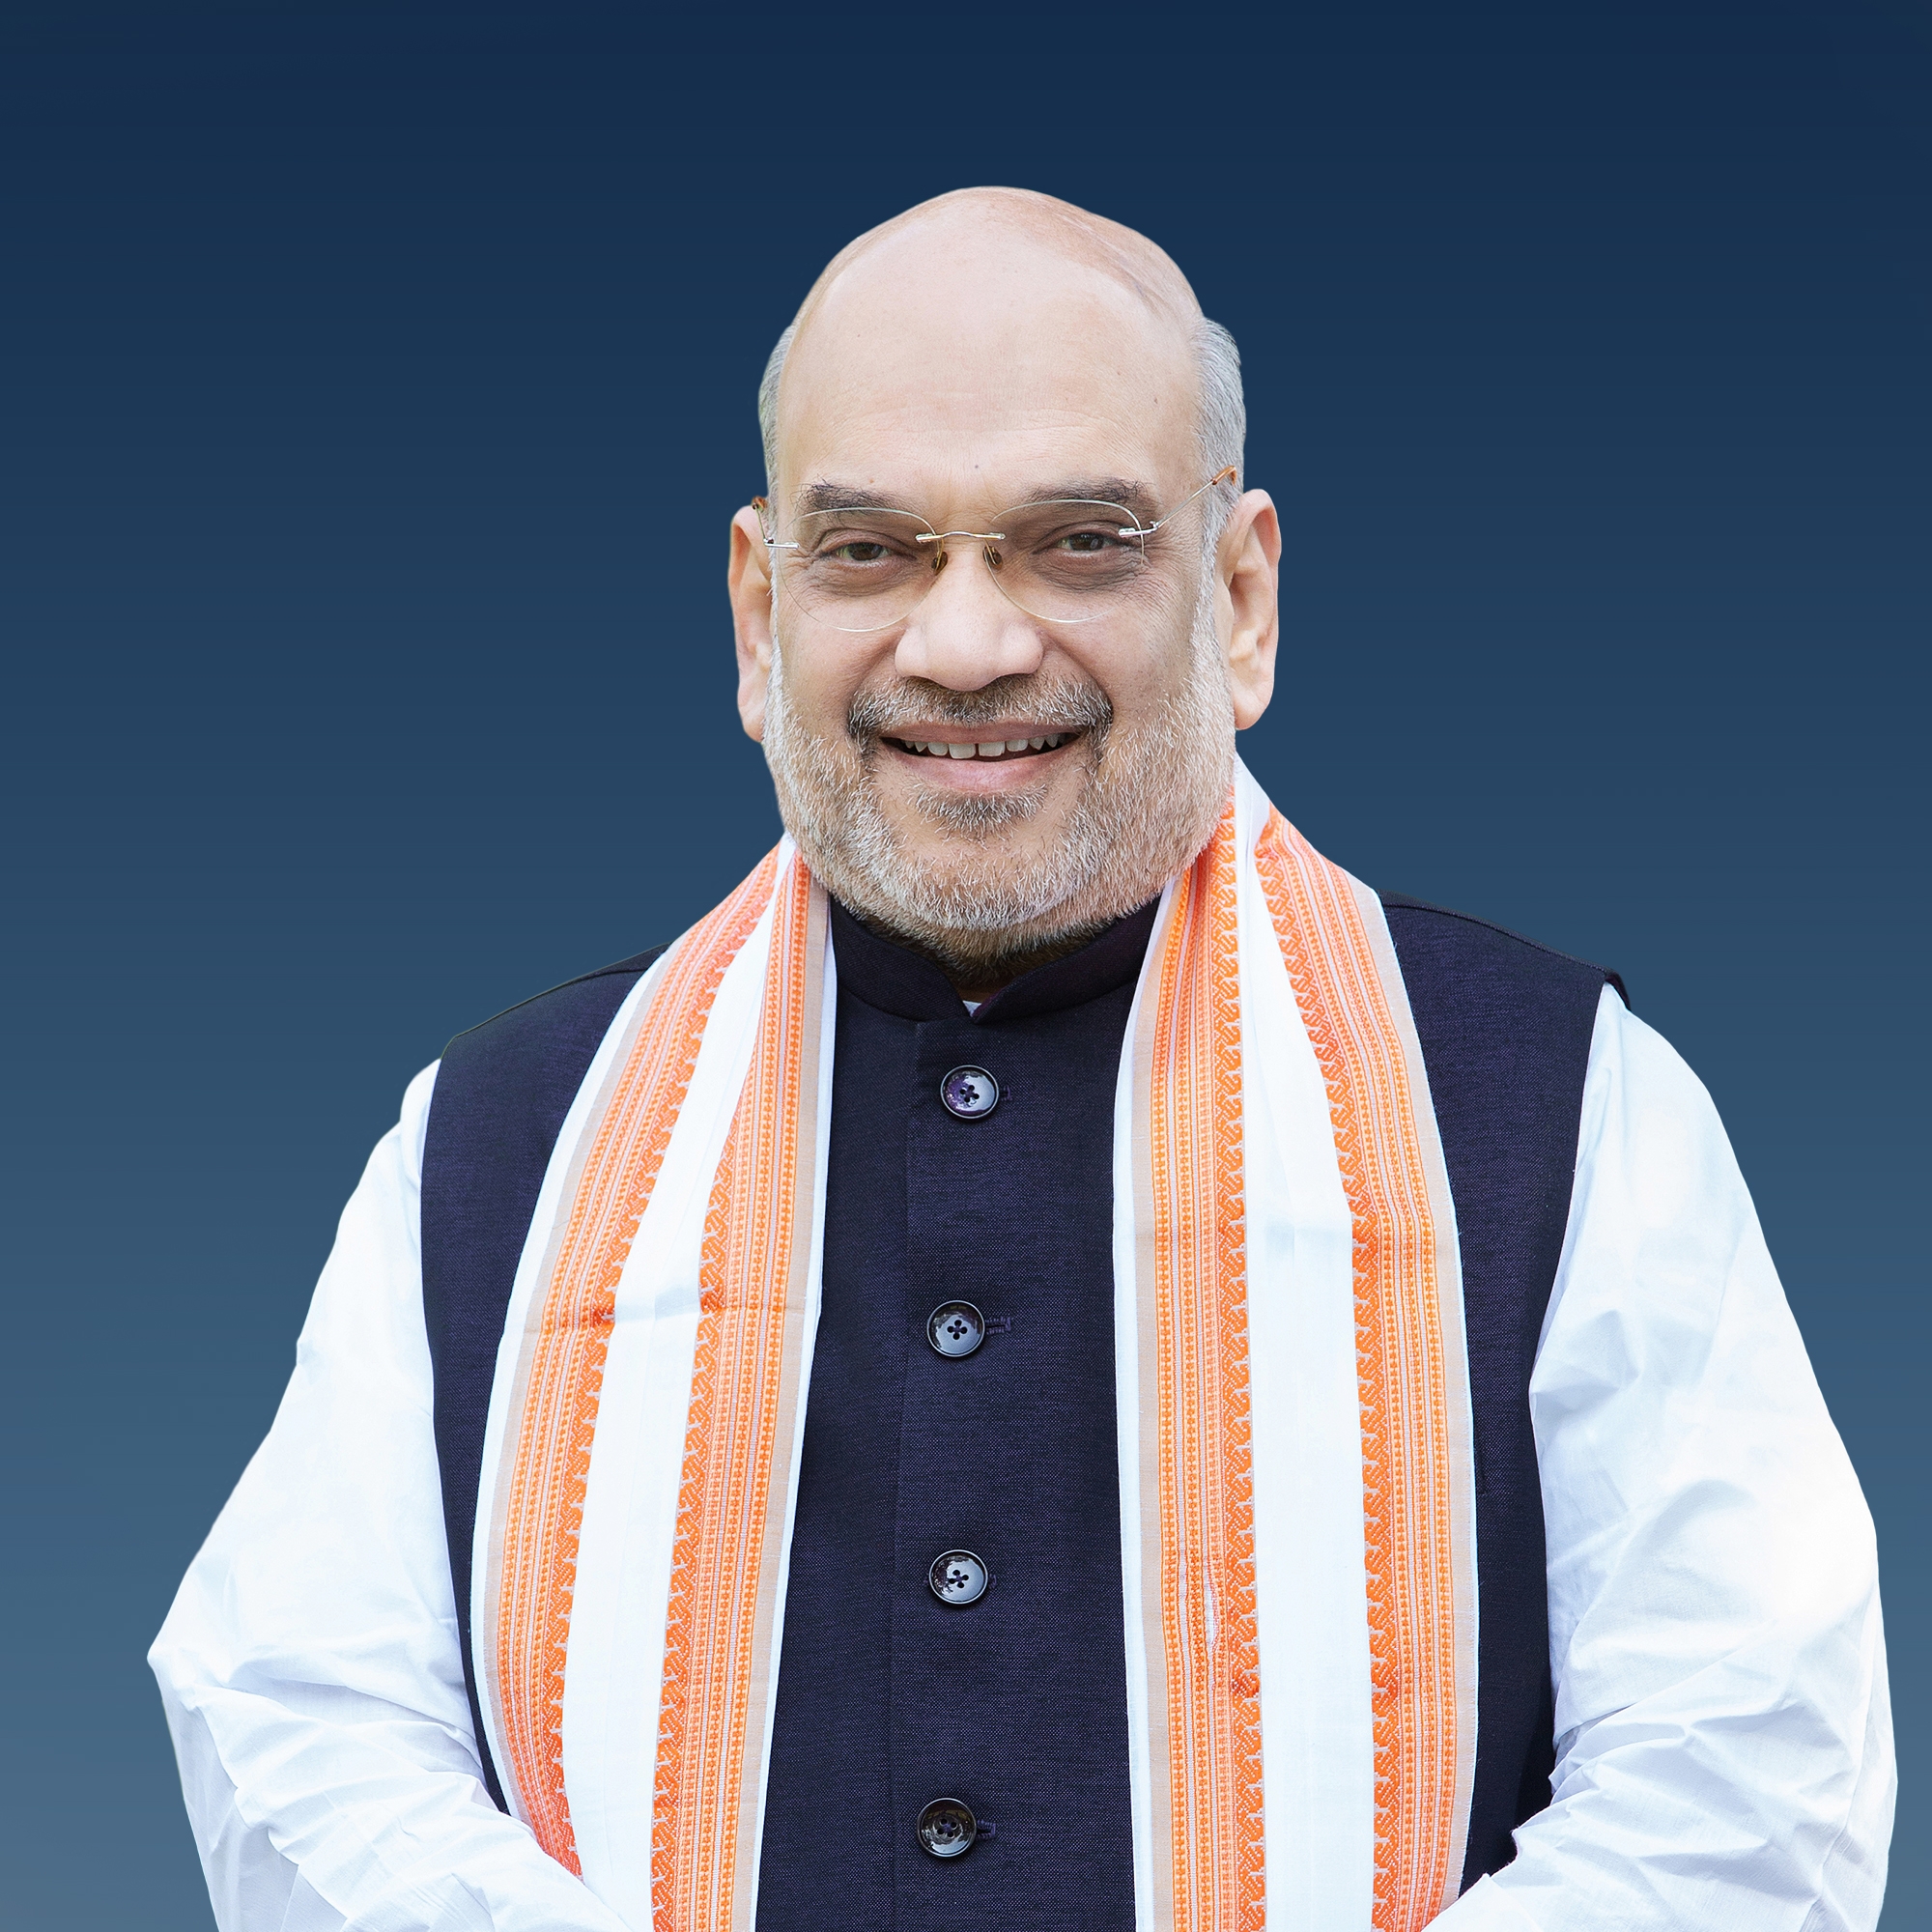 Meghalaya BJP to raise ILP implementation, language beside other issues with Amit Shah